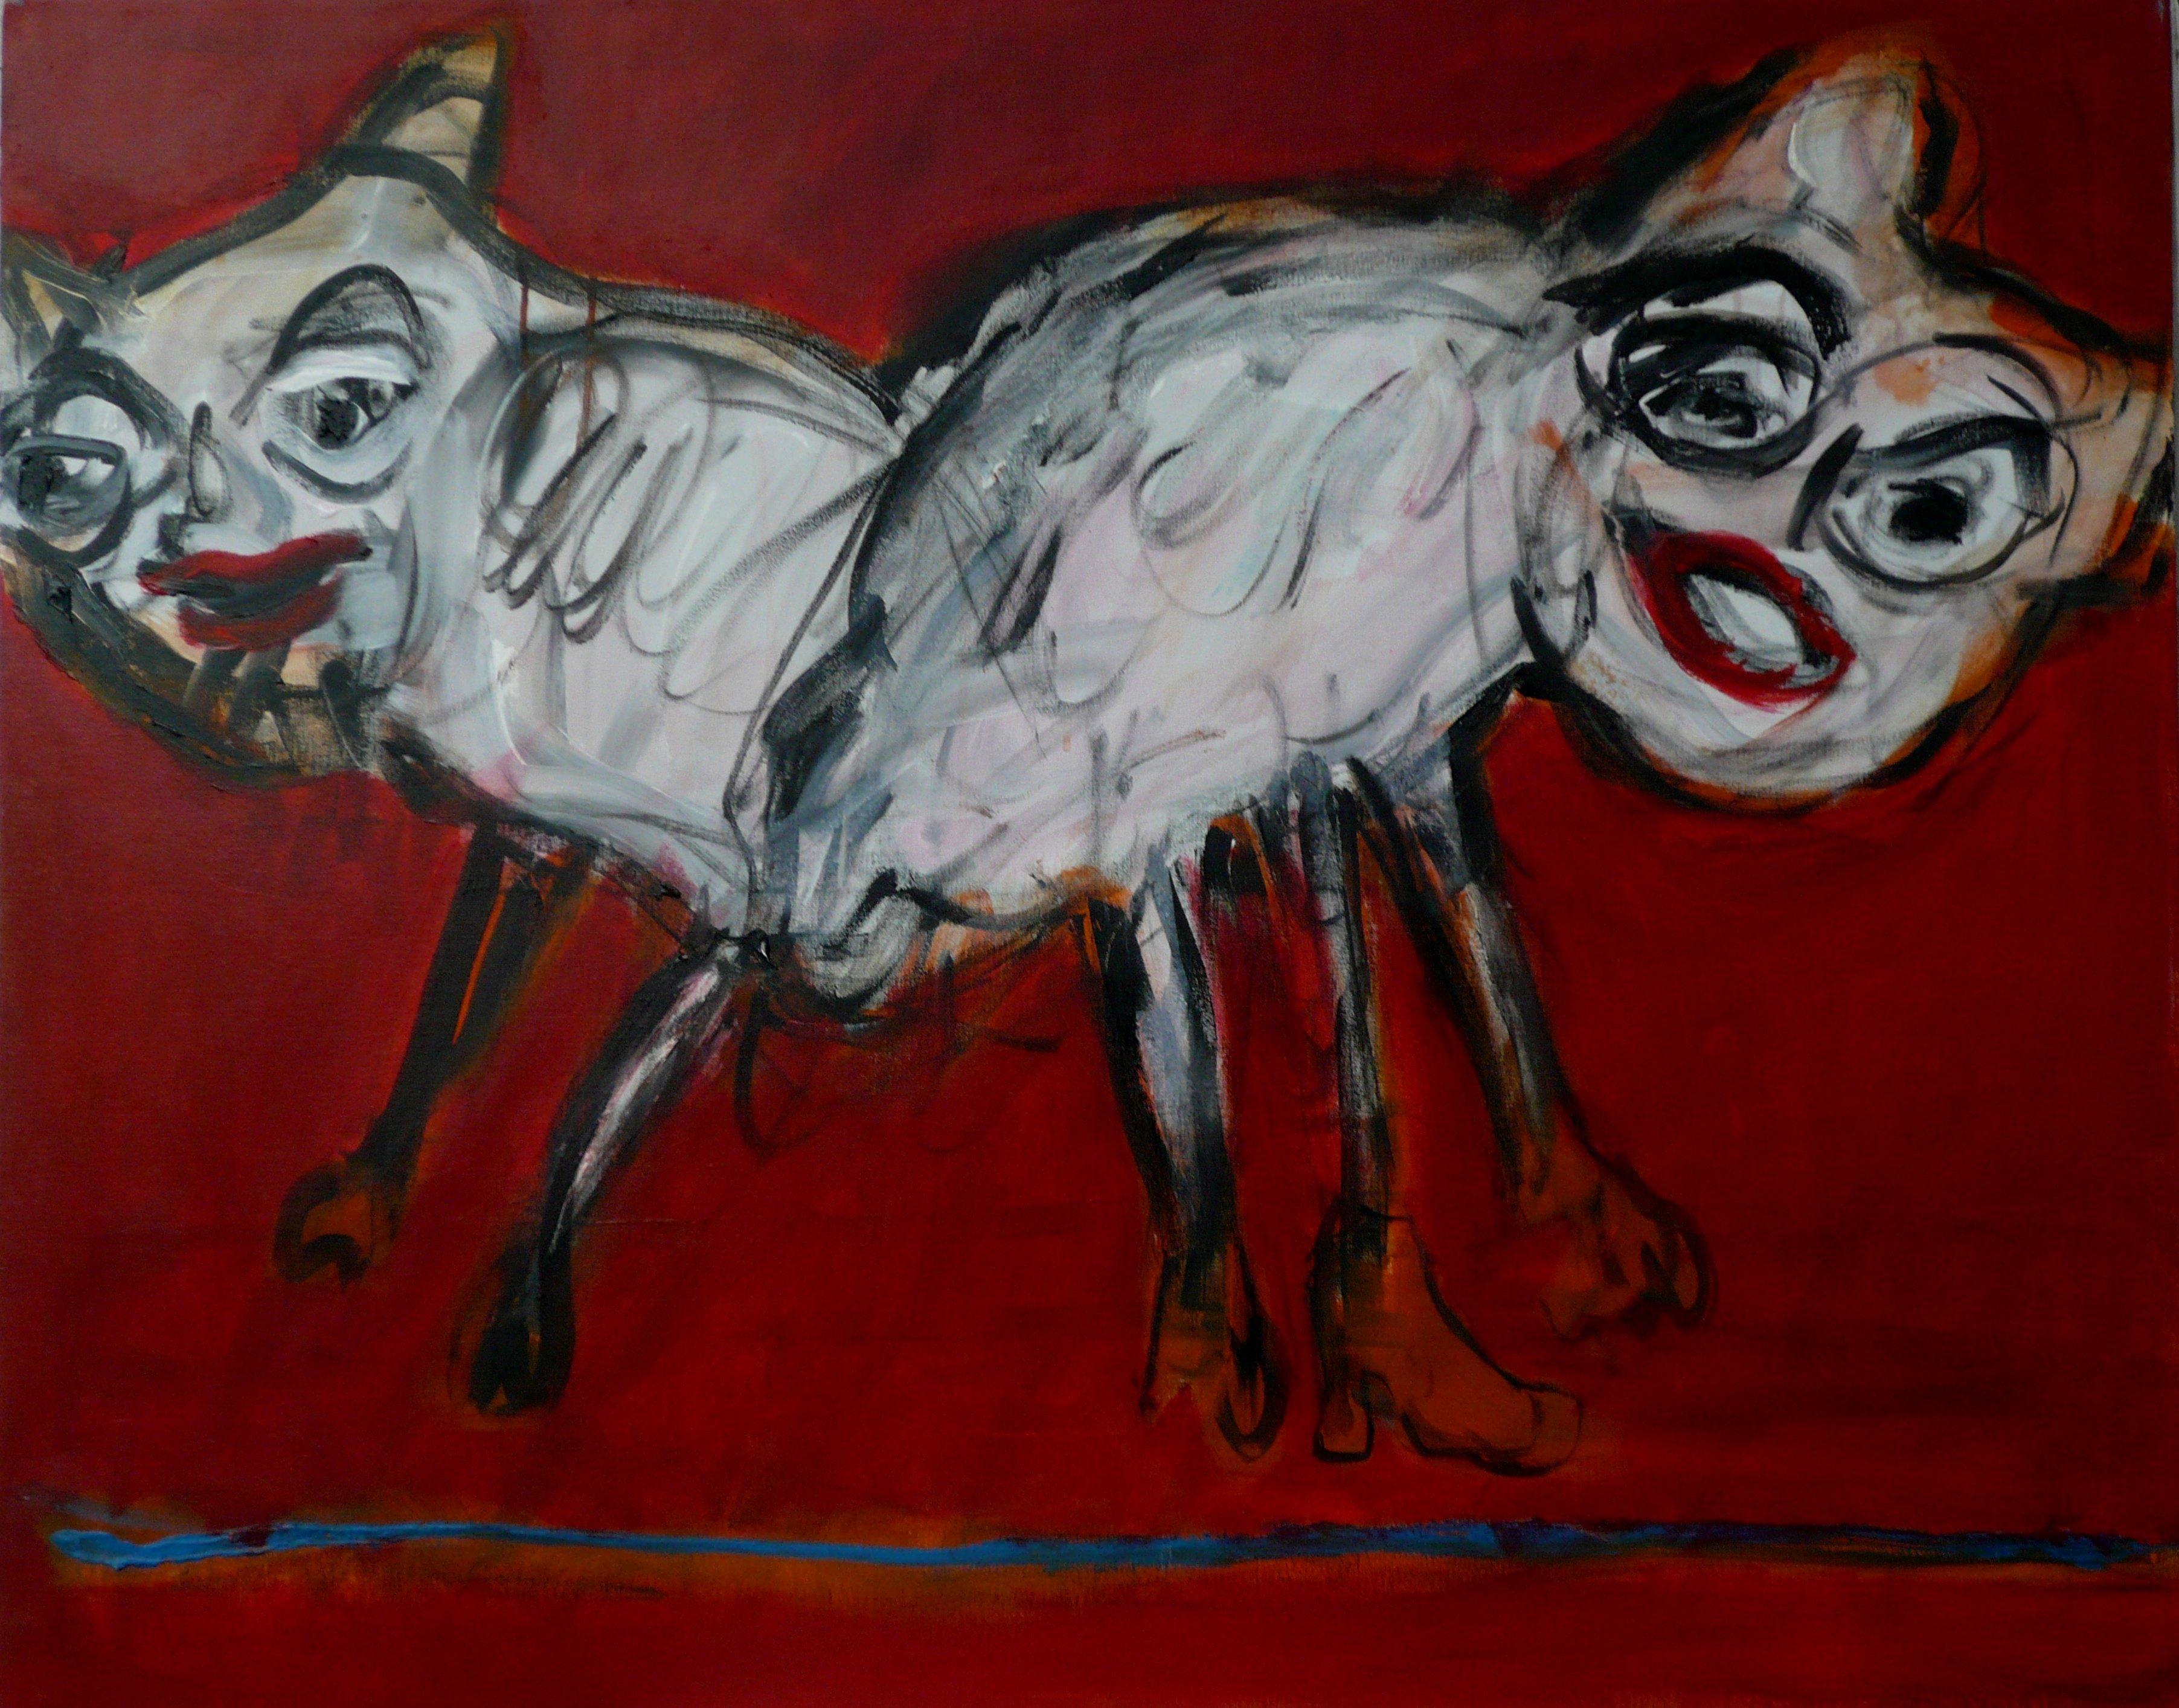 Beasts on a red background - Joanna Flatau, Contemporary Expressionist painting